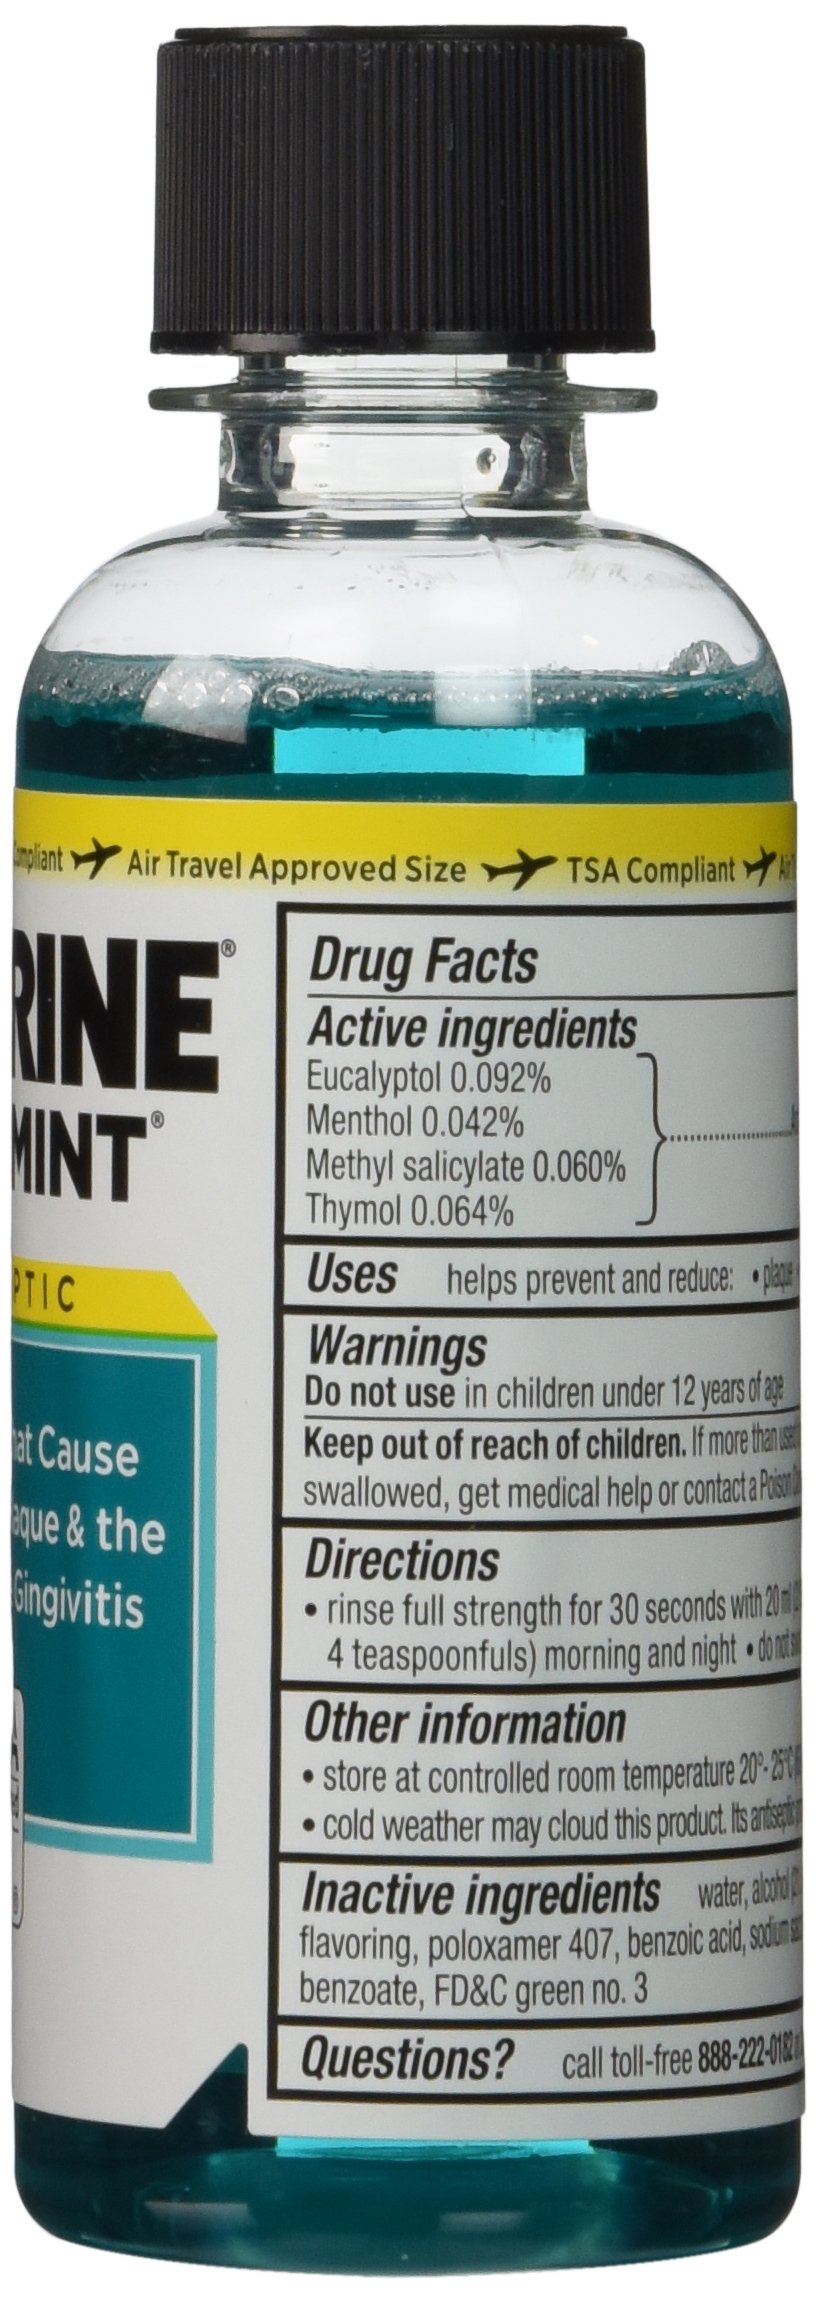 Listerine Cool Mint Antiseptic Mouthwash Travel Size 3.2 Ounces (Pack of 6)